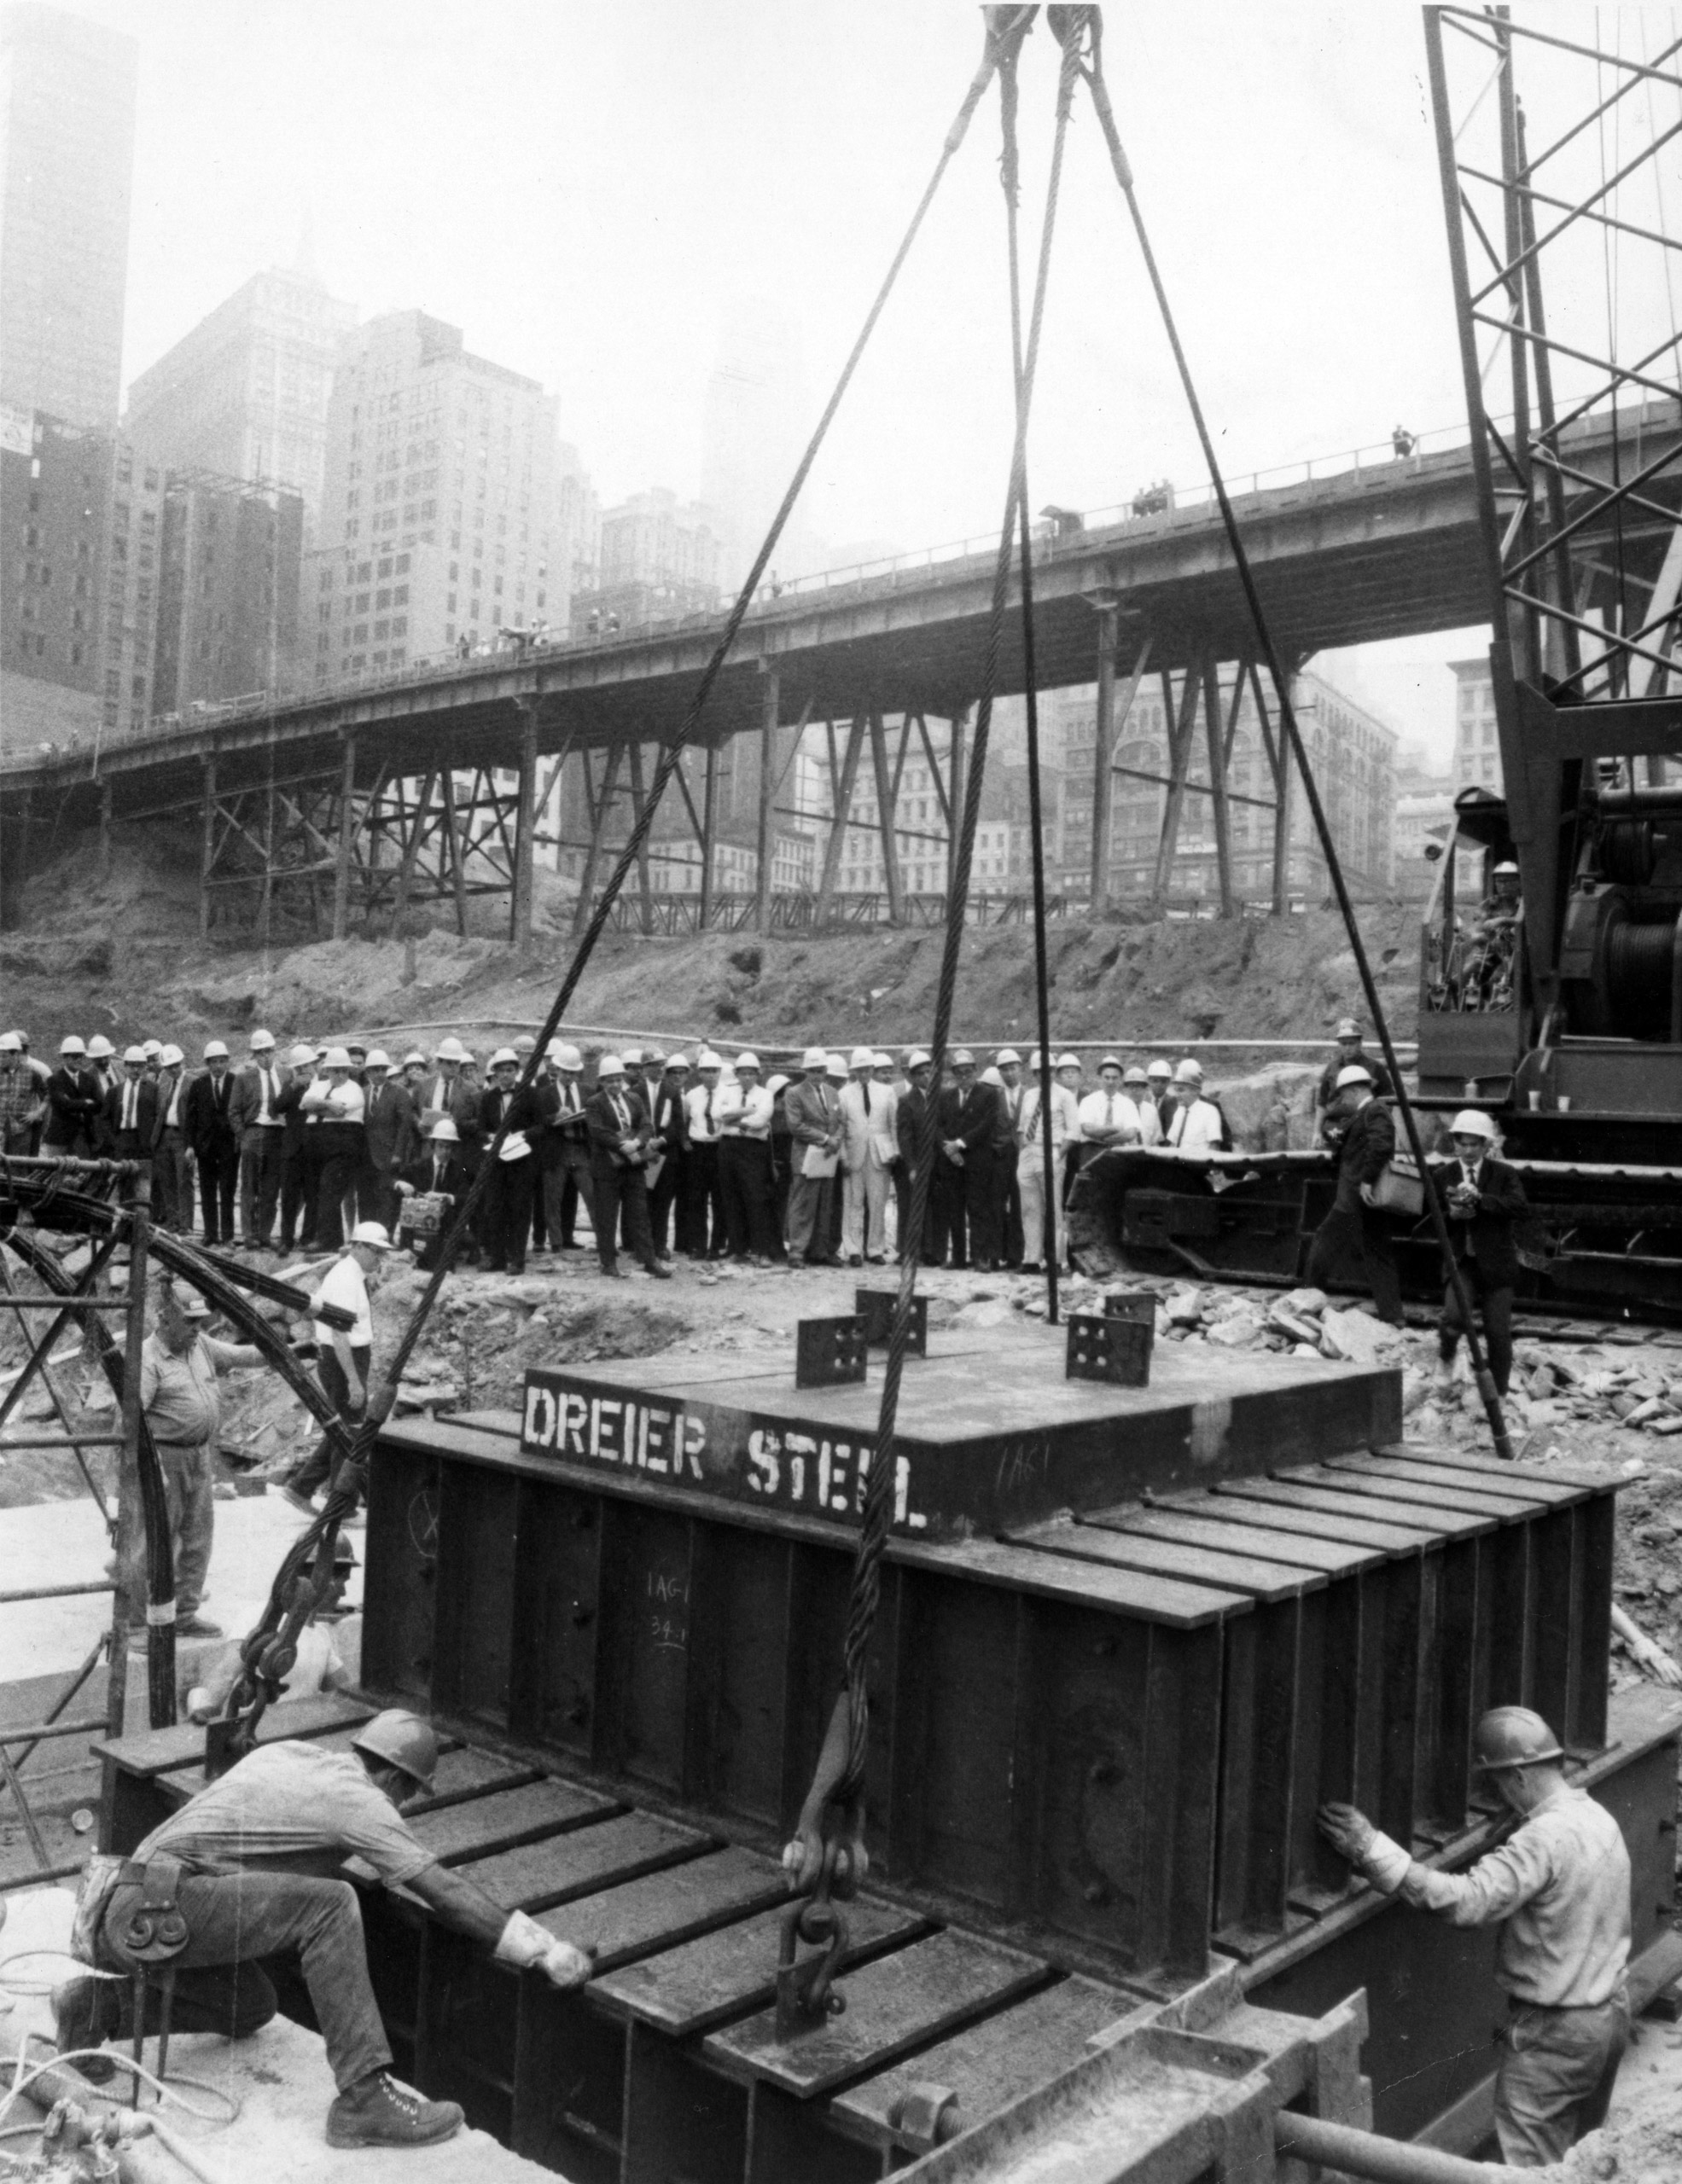 Steelworkers guide a 34 ton steel grillage into place 70 feet below street level at the site of the World Trade Center in New York, August 6, 1968. The grillage is a complex of steel constructed in three tiers and is the first of 28 that will support the core columns of the 1350 foot high north tower. The grillage is 11 feet wide, 15 feet long, and 7 feet high.